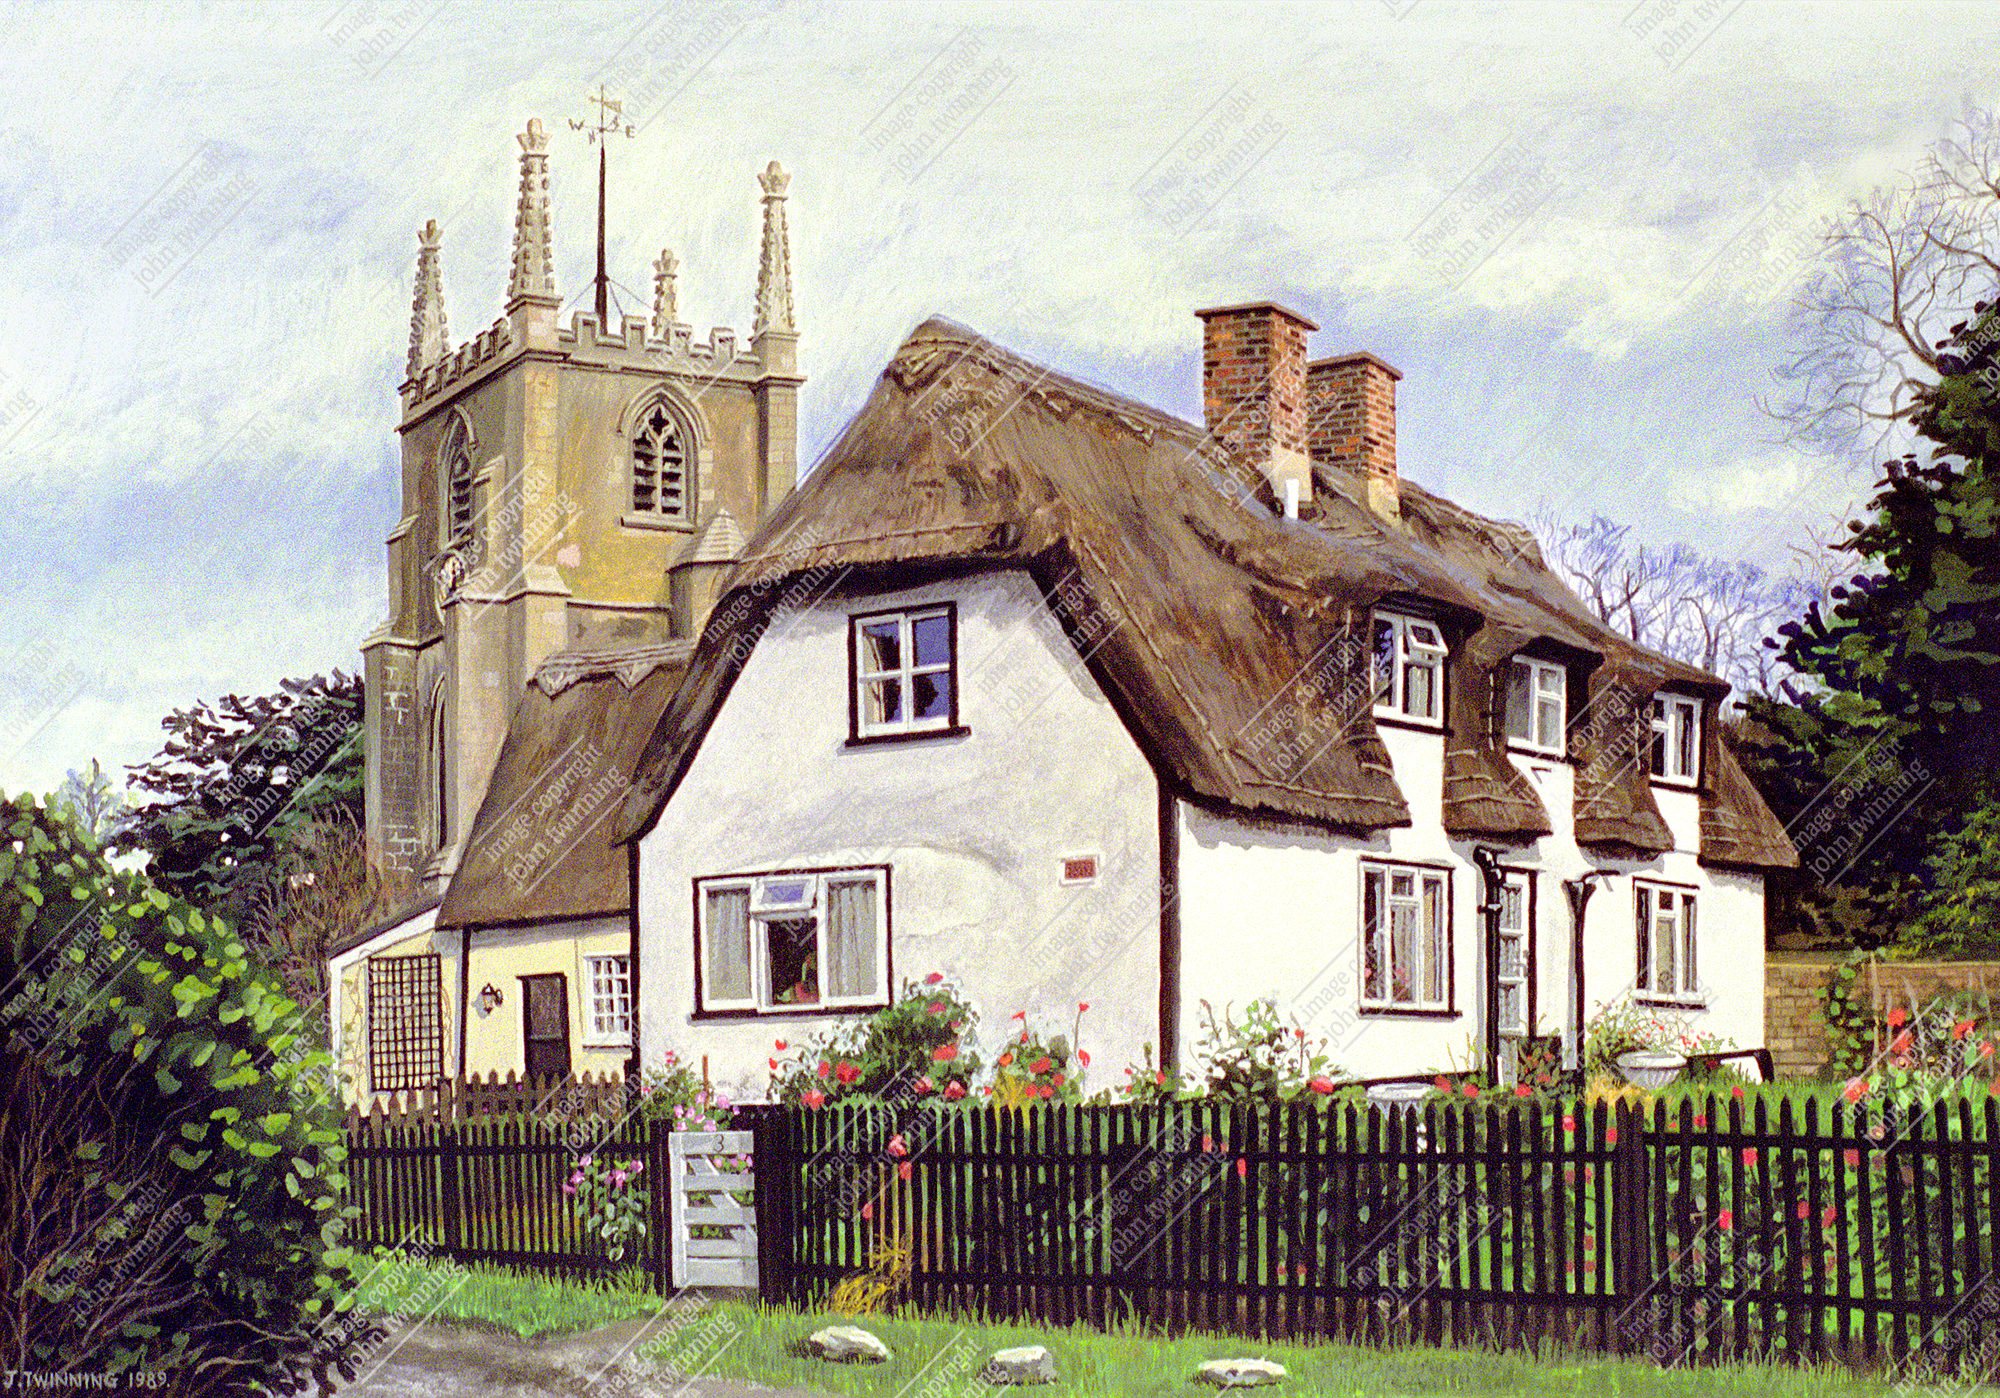 'Elsworth Village, Cambridgeshire' - art print from a painting of this lovely rural scene with parish church and cottages